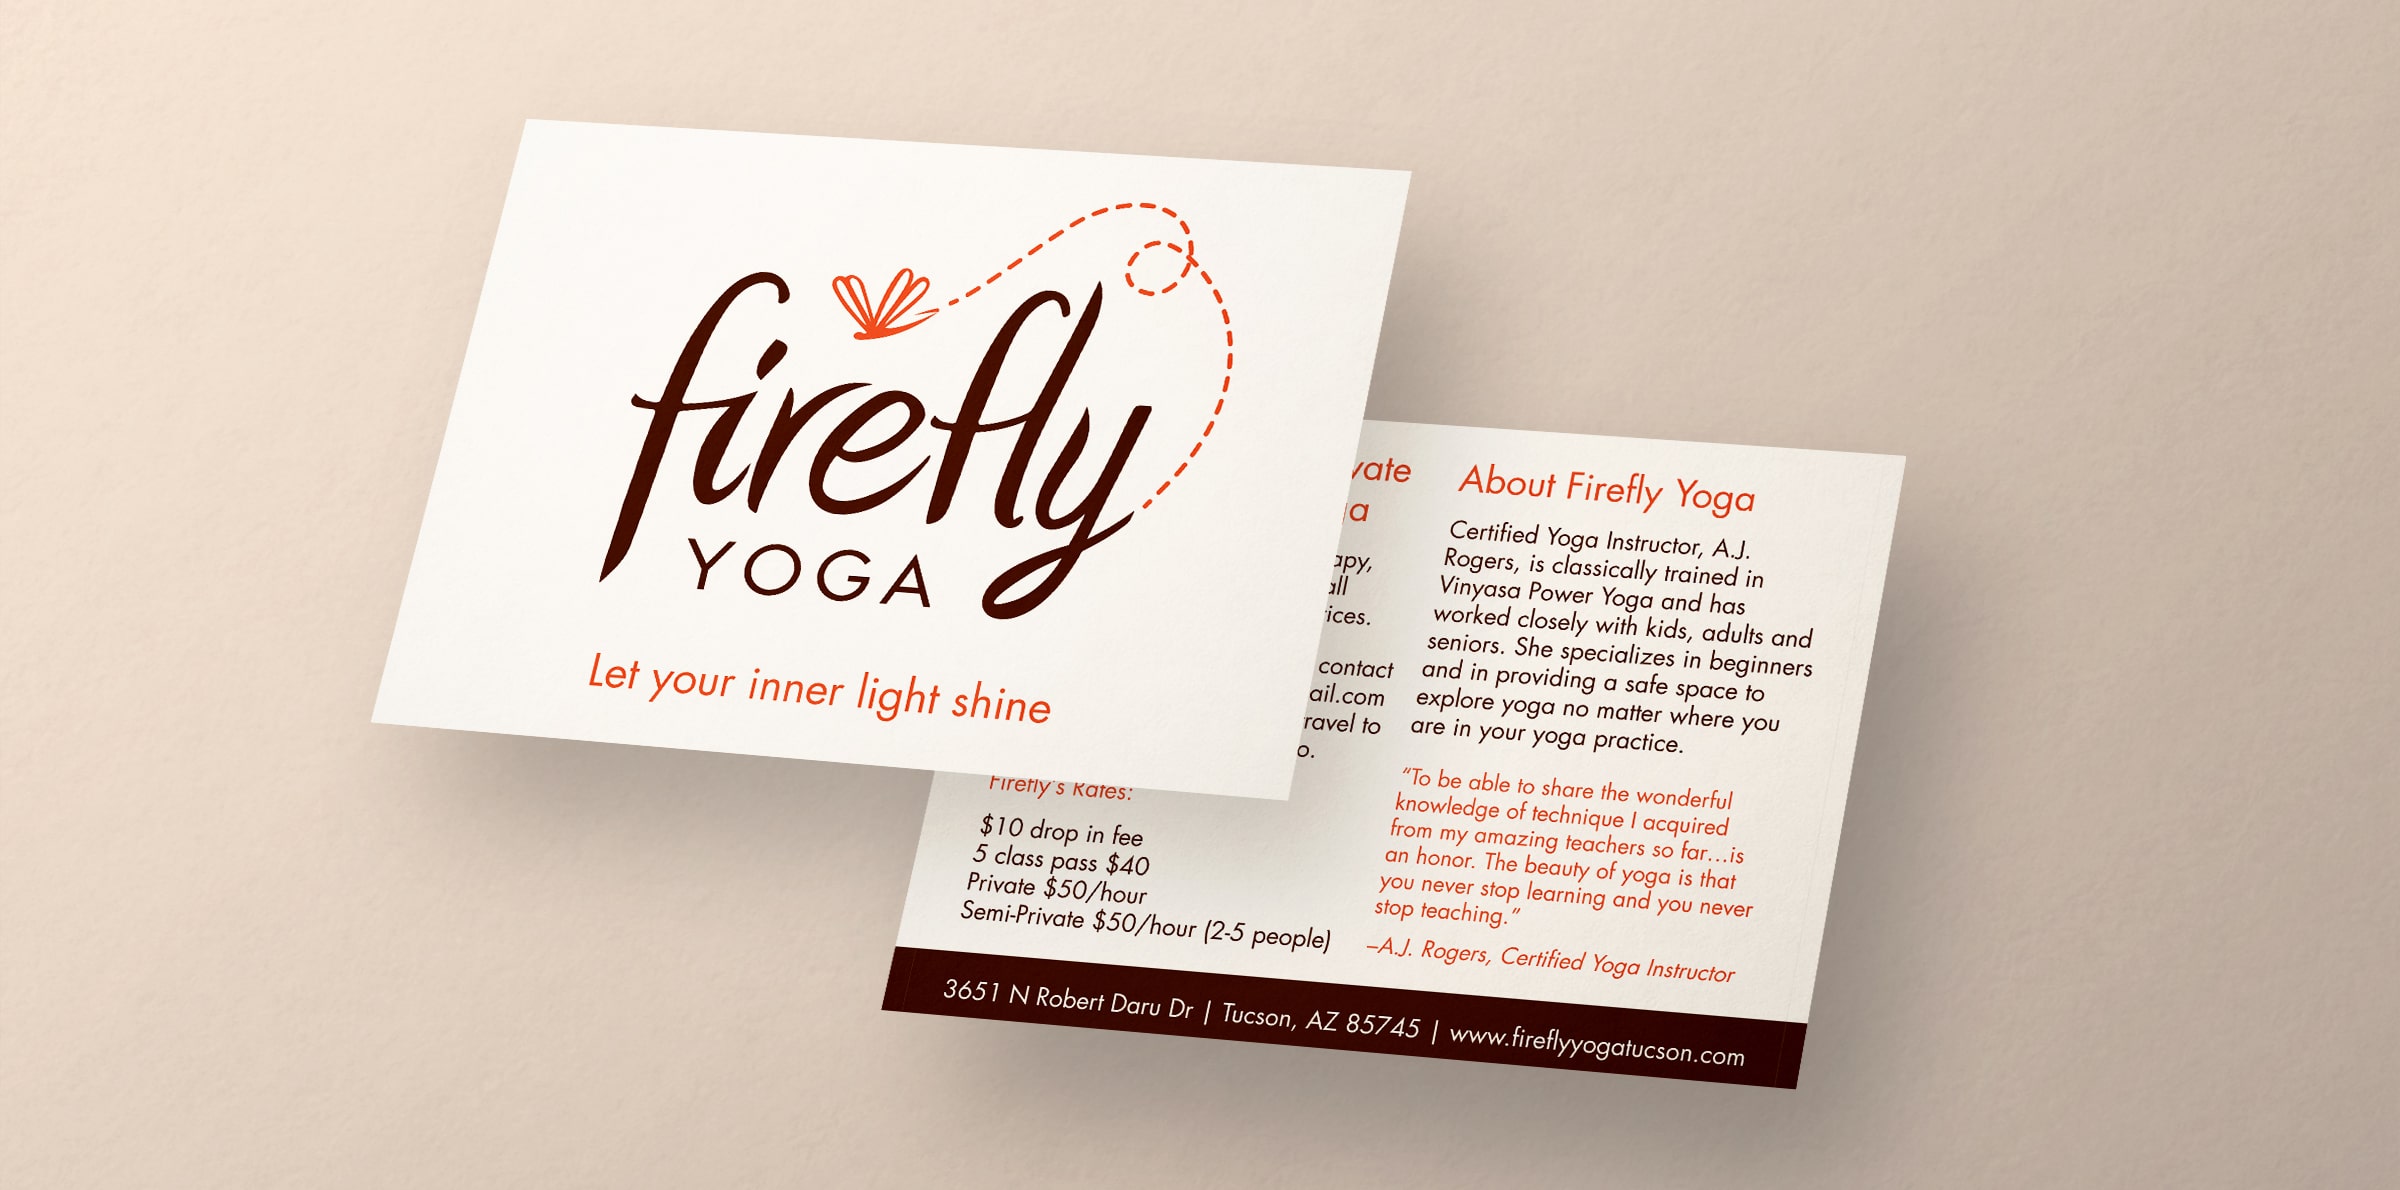 Firefly Yoga fitness logo on postcard front with back view providing more information about the brand and its services.